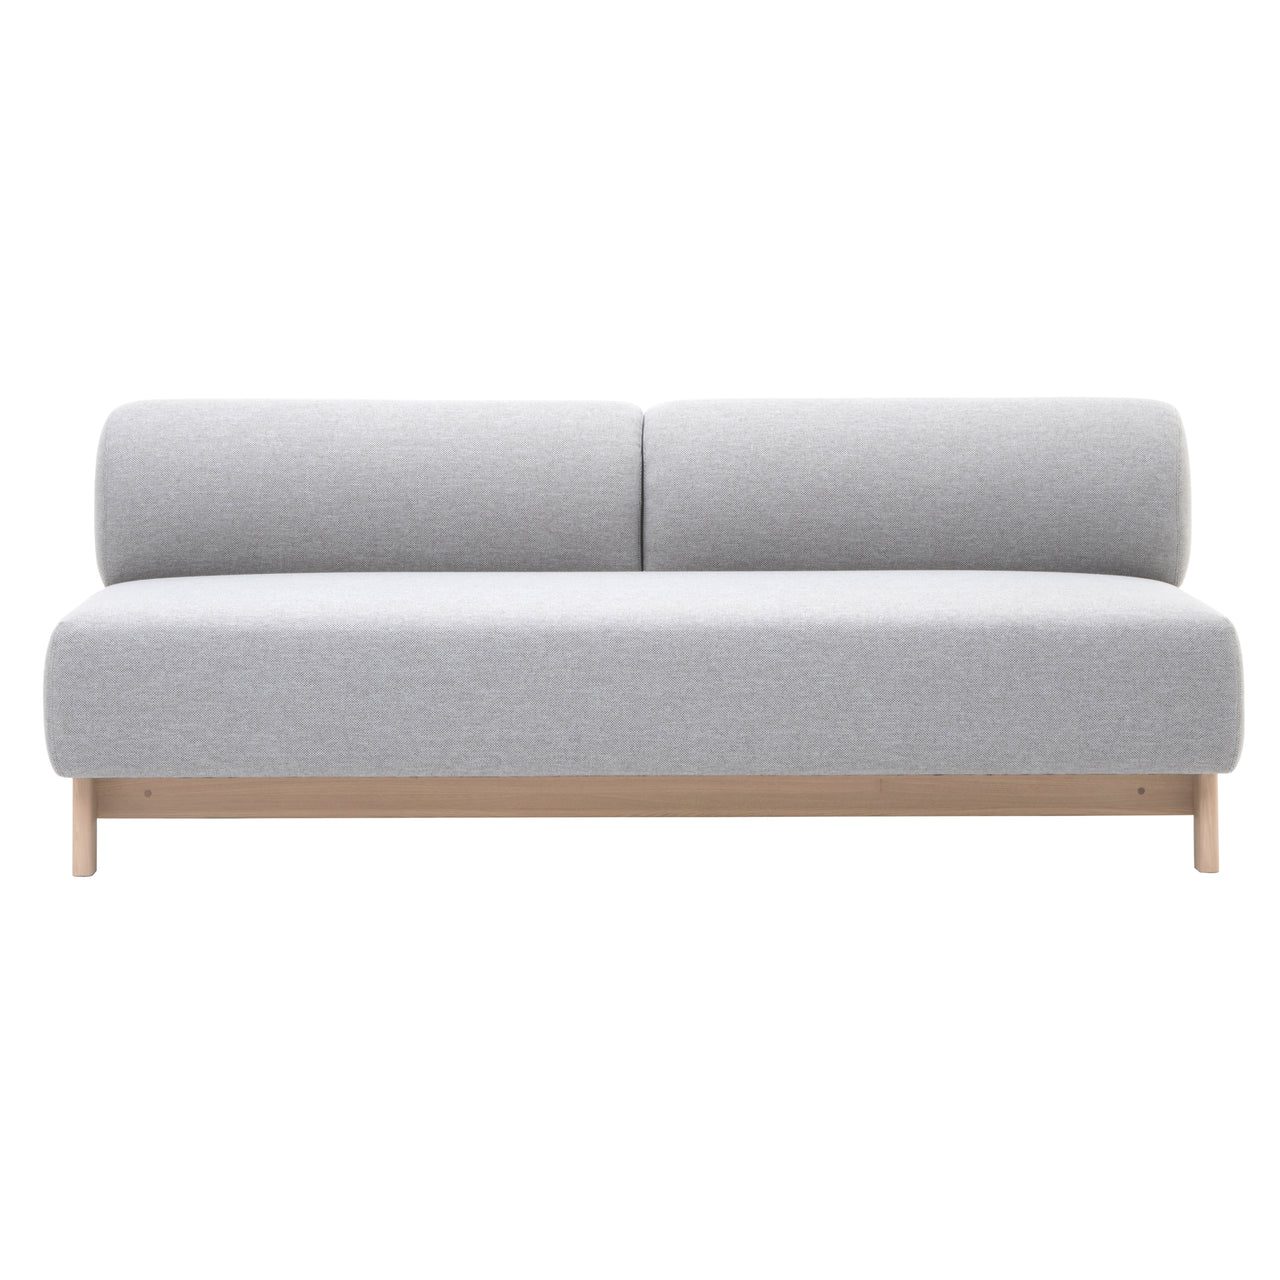 Elephant 3 Seater Bench: Pale Natural